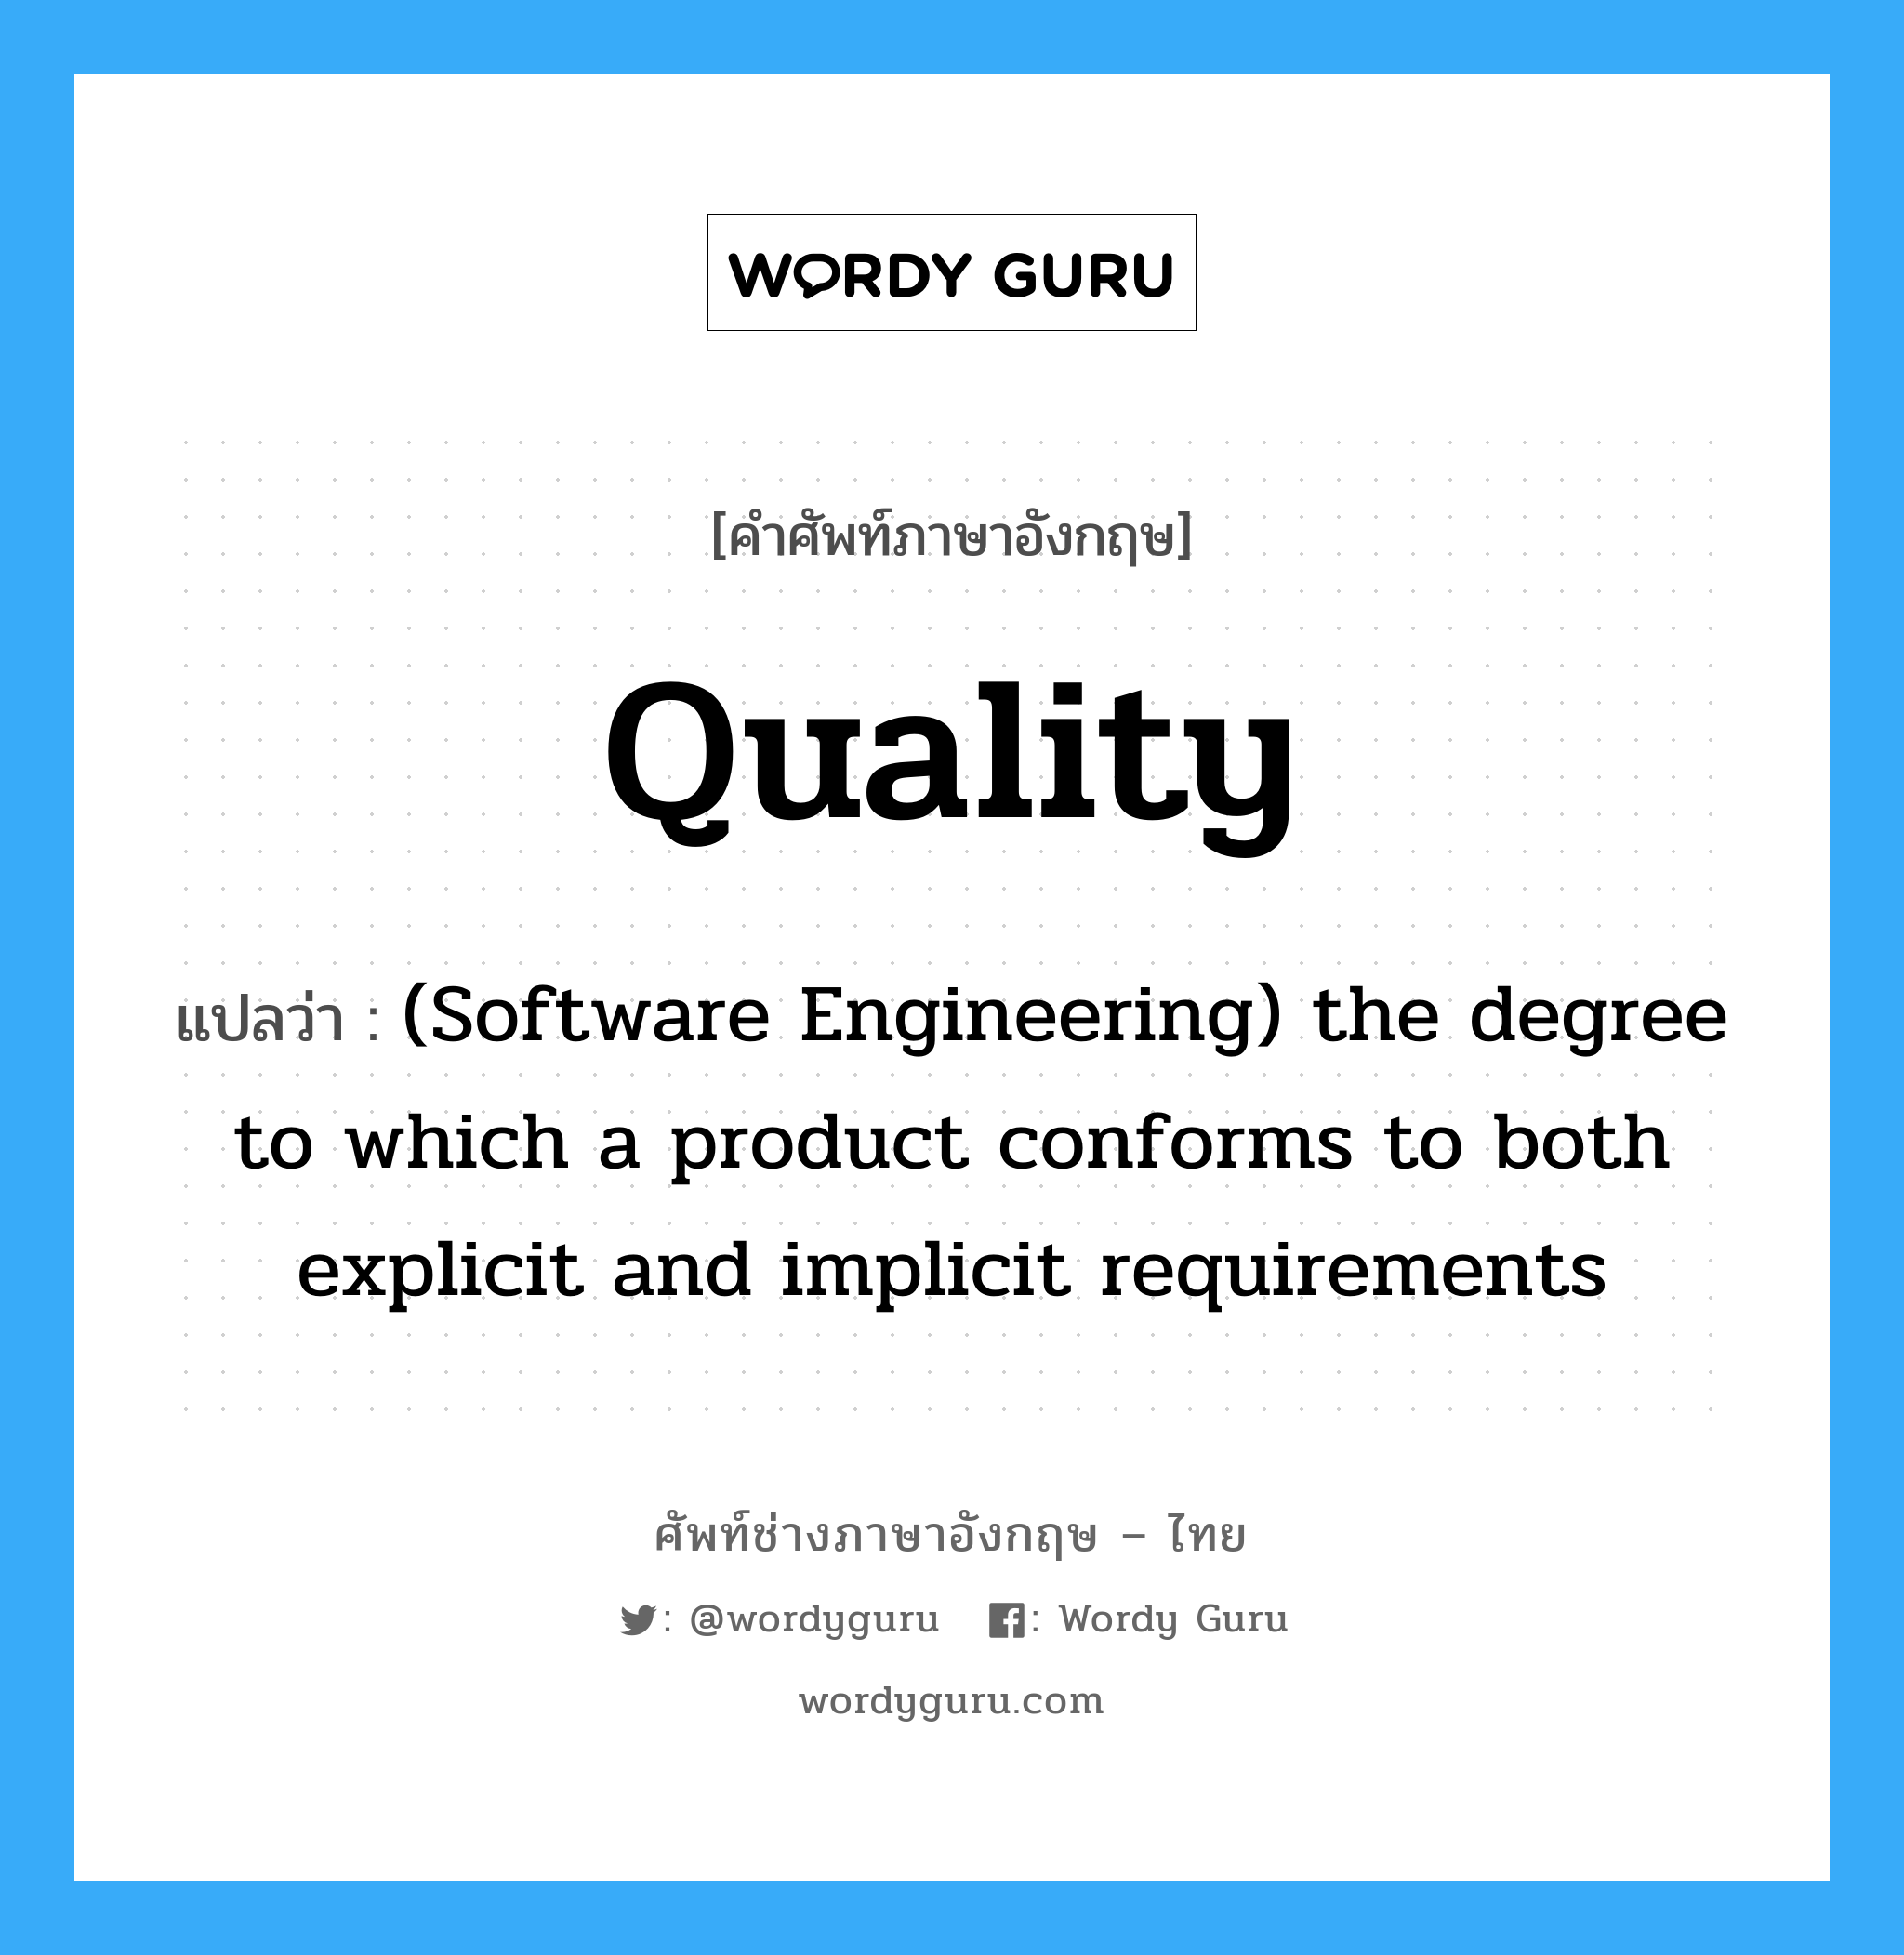 (Software Engineering) the degree to which a program is amenable to change ภาษาอังกฤษ?, คำศัพท์ช่างภาษาอังกฤษ - ไทย (Software Engineering) the degree to which a product conforms to both explicit and implicit requirements คำศัพท์ภาษาอังกฤษ (Software Engineering) the degree to which a product conforms to both explicit and implicit requirements แปลว่า Quality